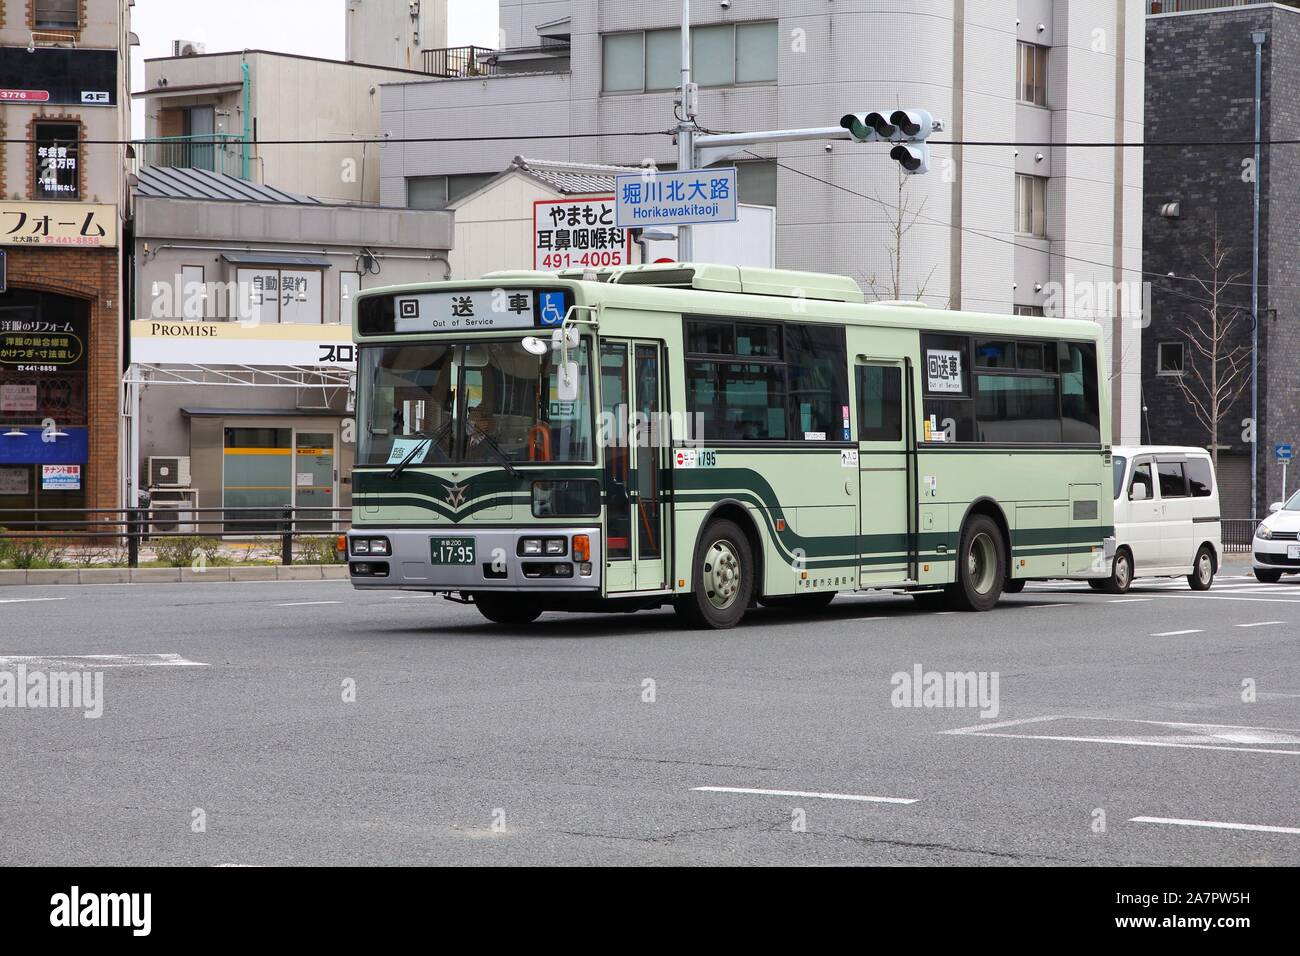 KYOTO, JAPAN - APRIL 15, 2012: Hino bus in Kyoto, Japan. Hino Motors exists since 1942, employs 9.500 people (2008) and is part of Toyota Motor Compan Stock Photo